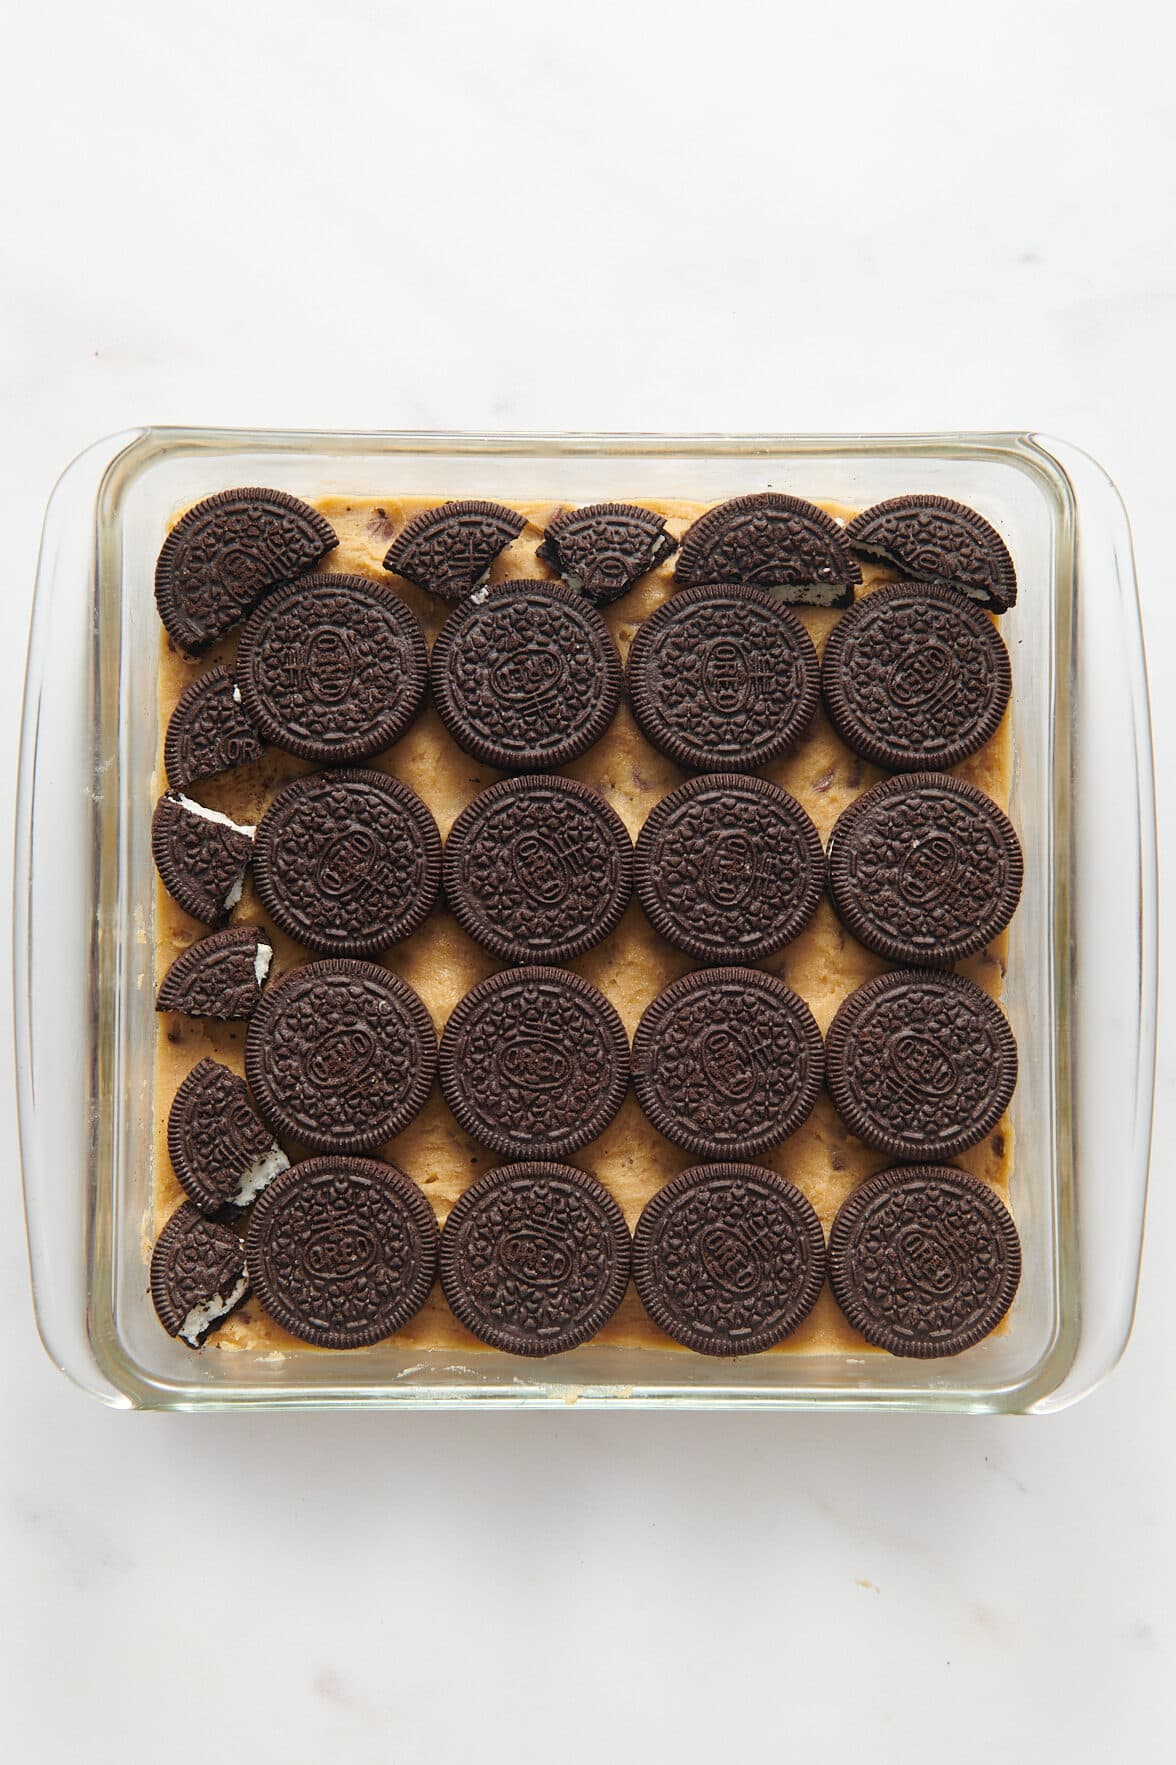 chocolate chip cookie dough batter layered at the bottom of a 9x9 glass baking dish and layered with Oreo cookies on top.